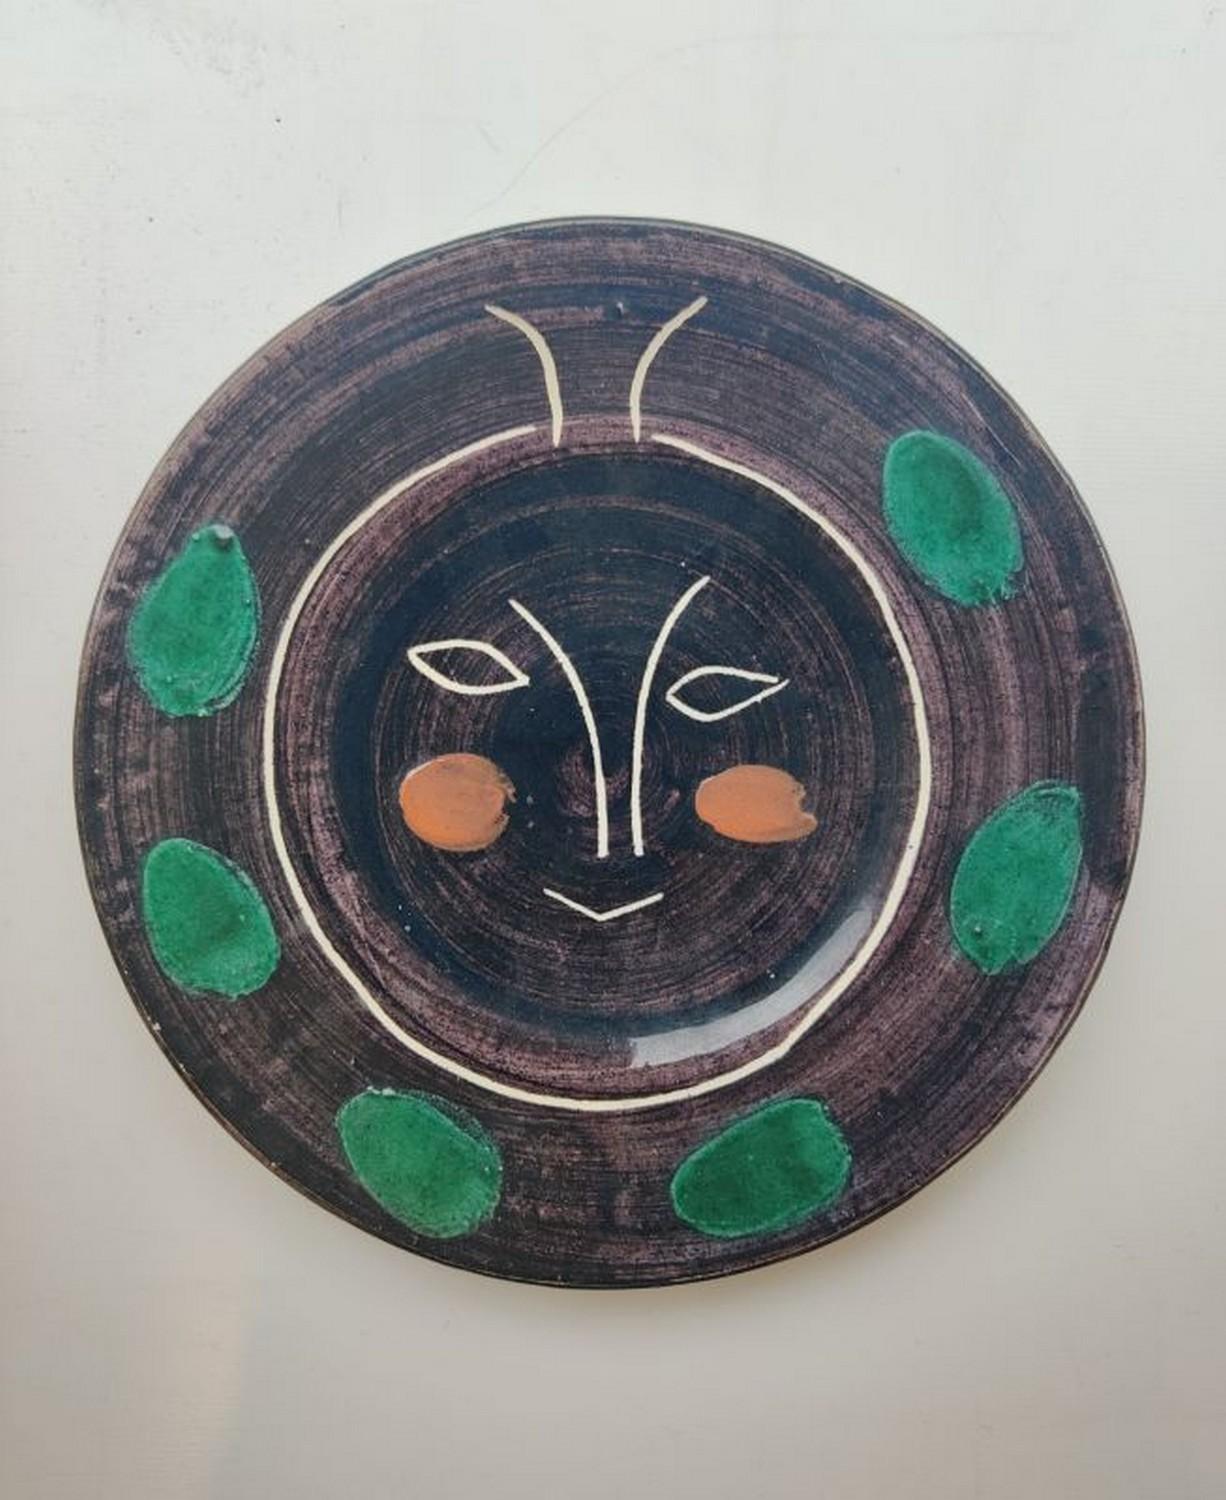 Pablo Picasso Abstract Sculpture - Plate "Black face" 